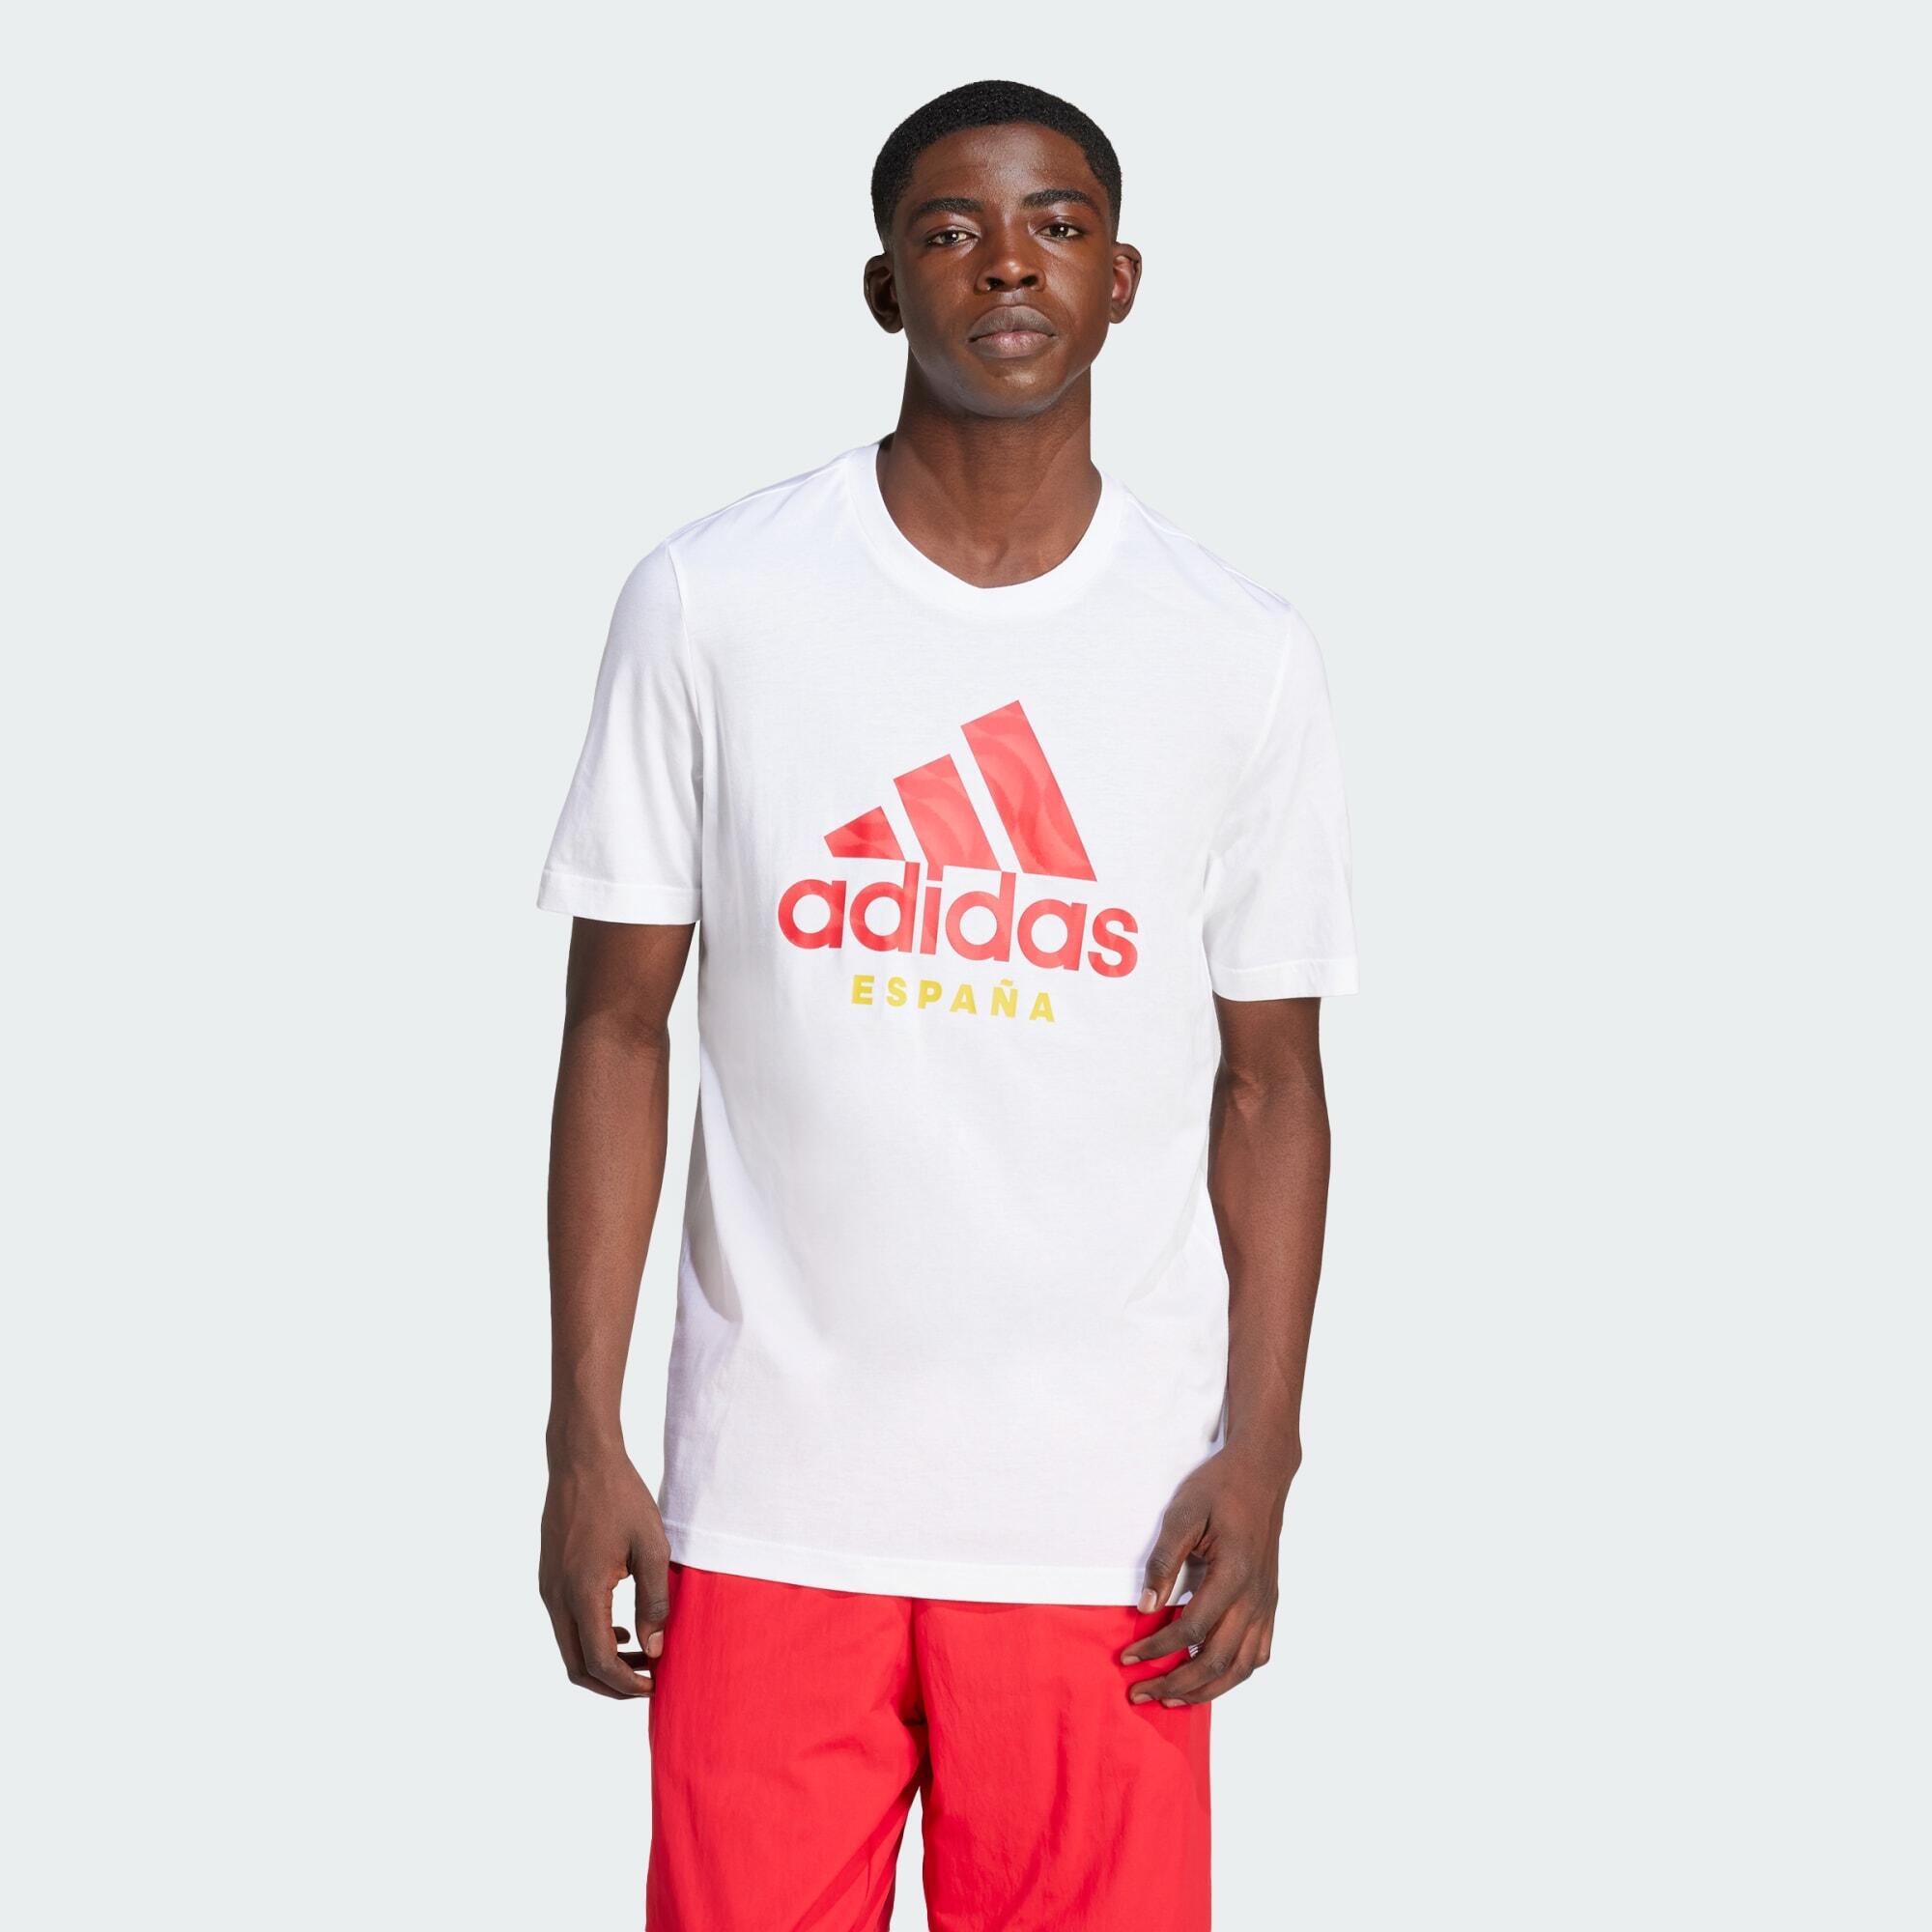 ADIDAS Spain DNA Graphic Tee